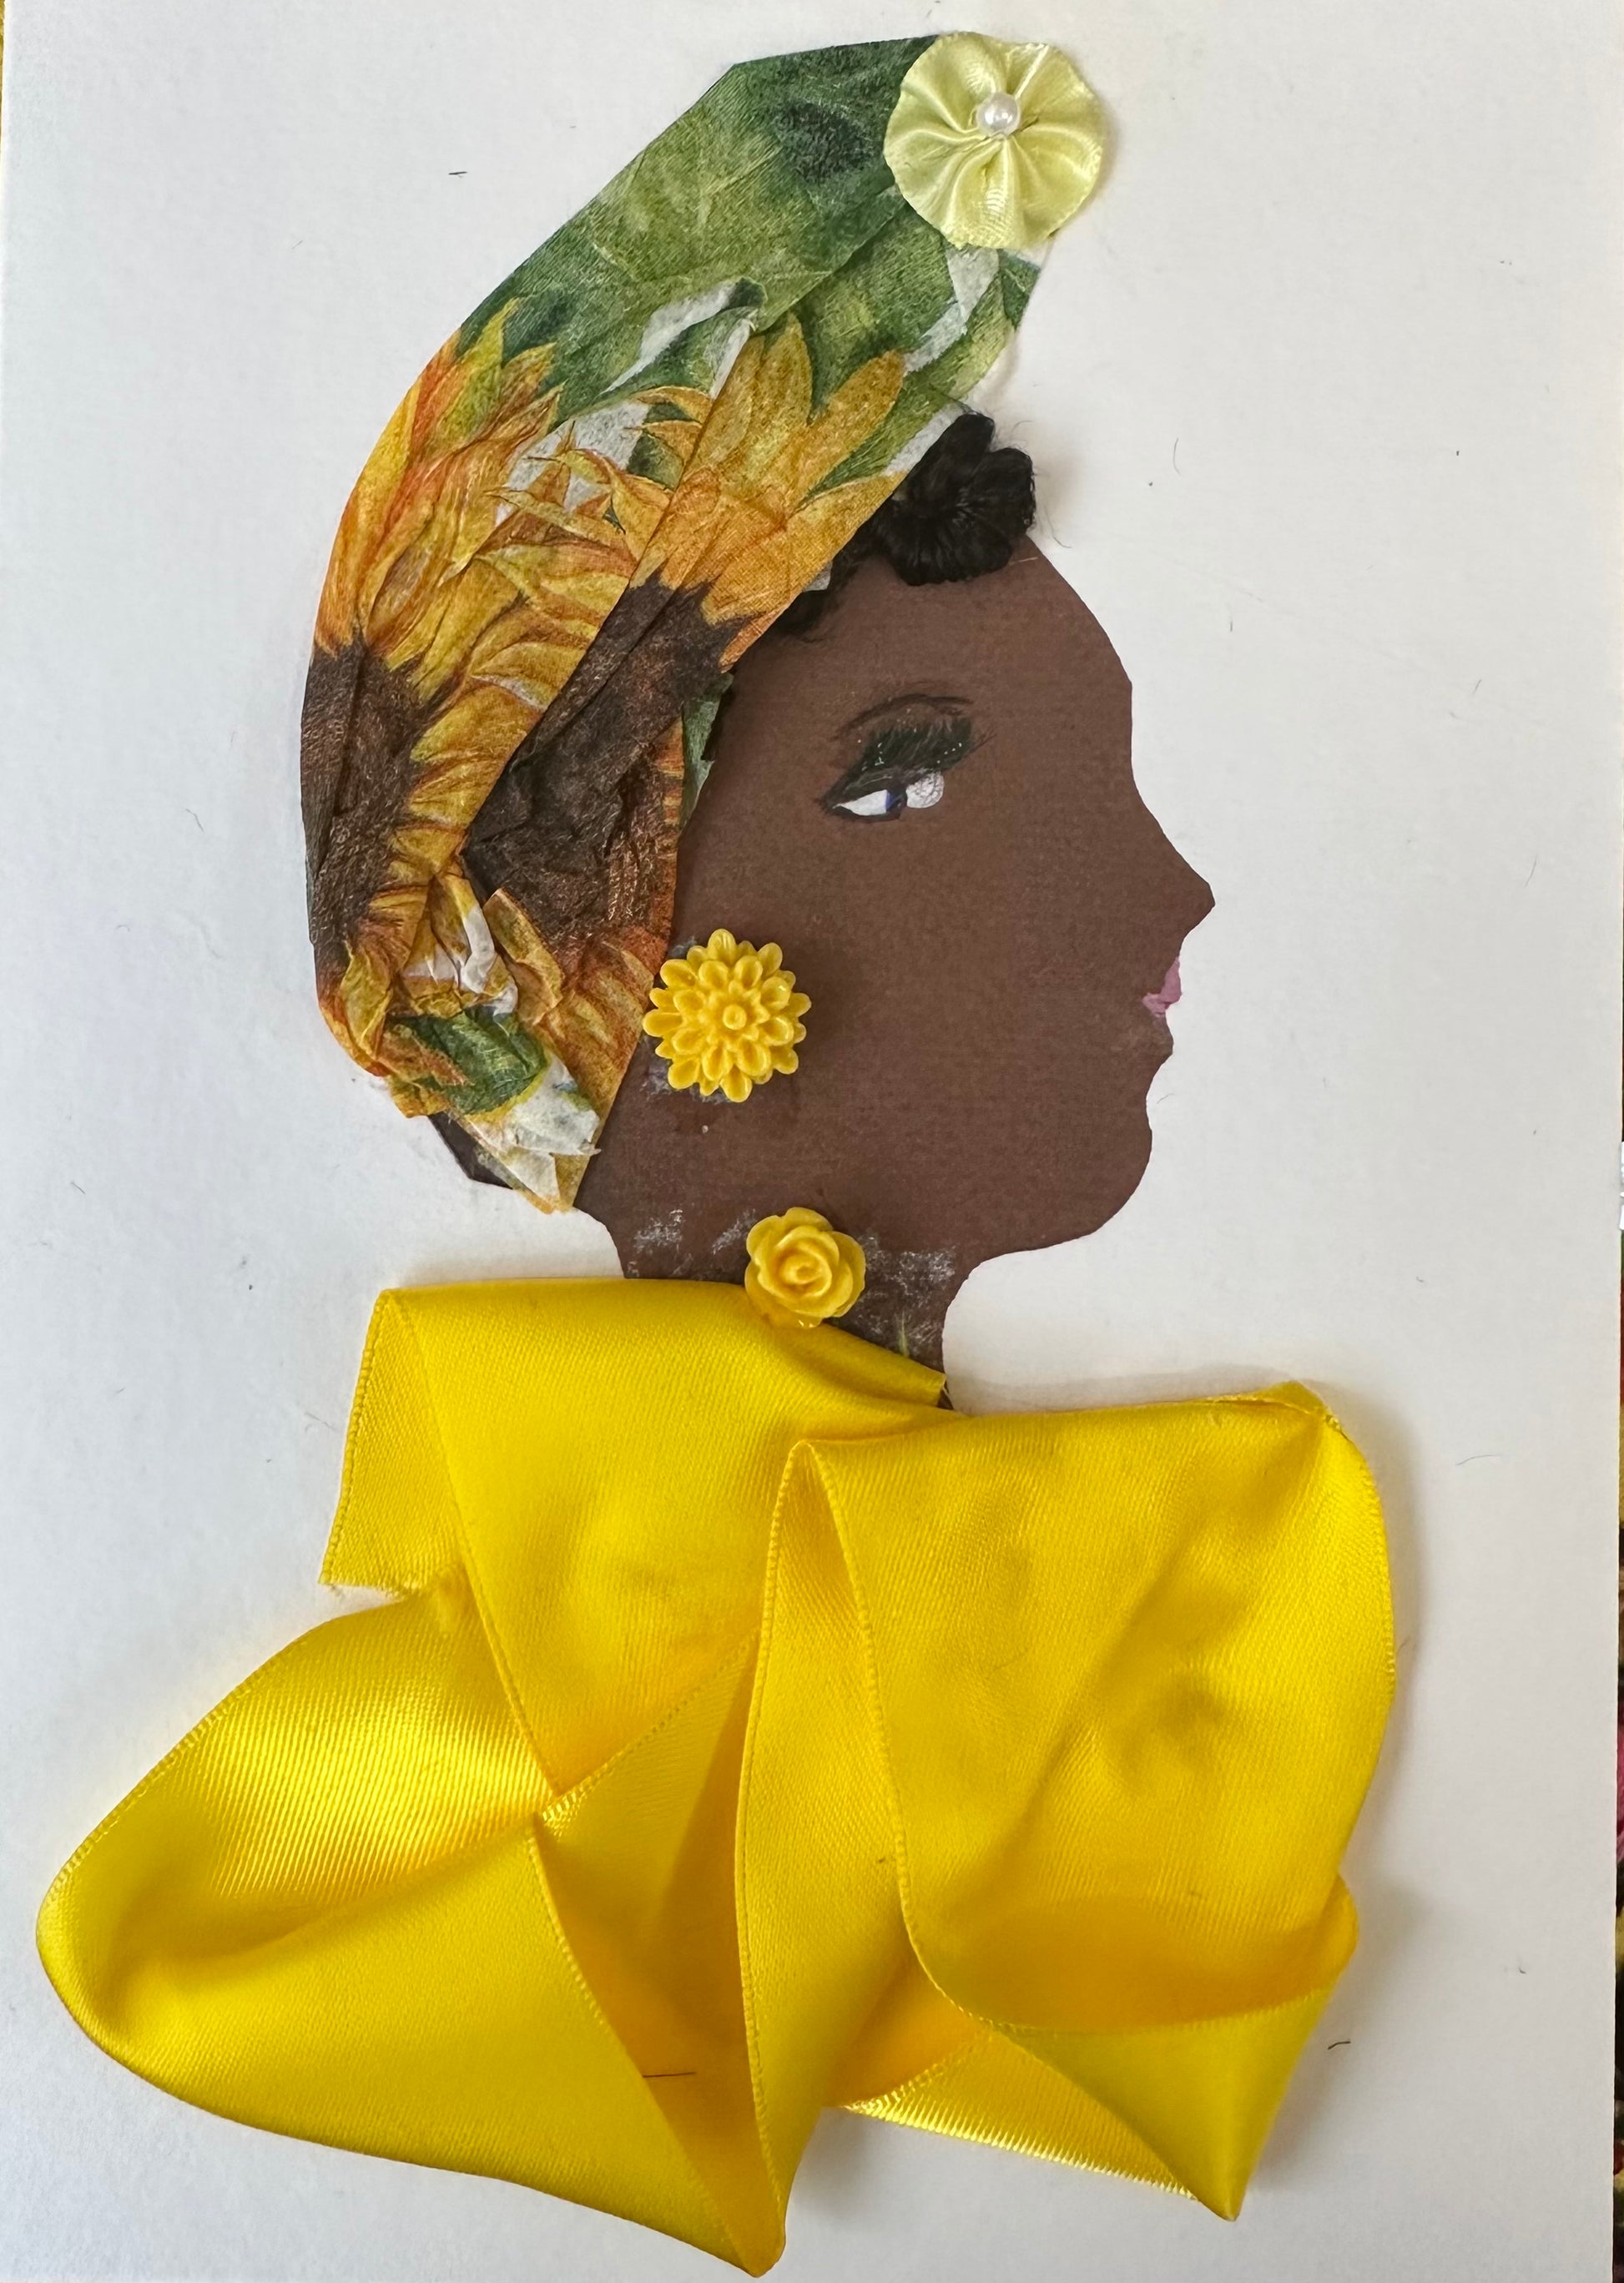 I designed this handmade card of a woman wearing a yellow silk-like blouse. Her hatinator is made of a tissue-textured material that is patterned with sunflowers and its leaves. On the top of the hat is a yellow silk-like flower, which matches the bright yellow flower.